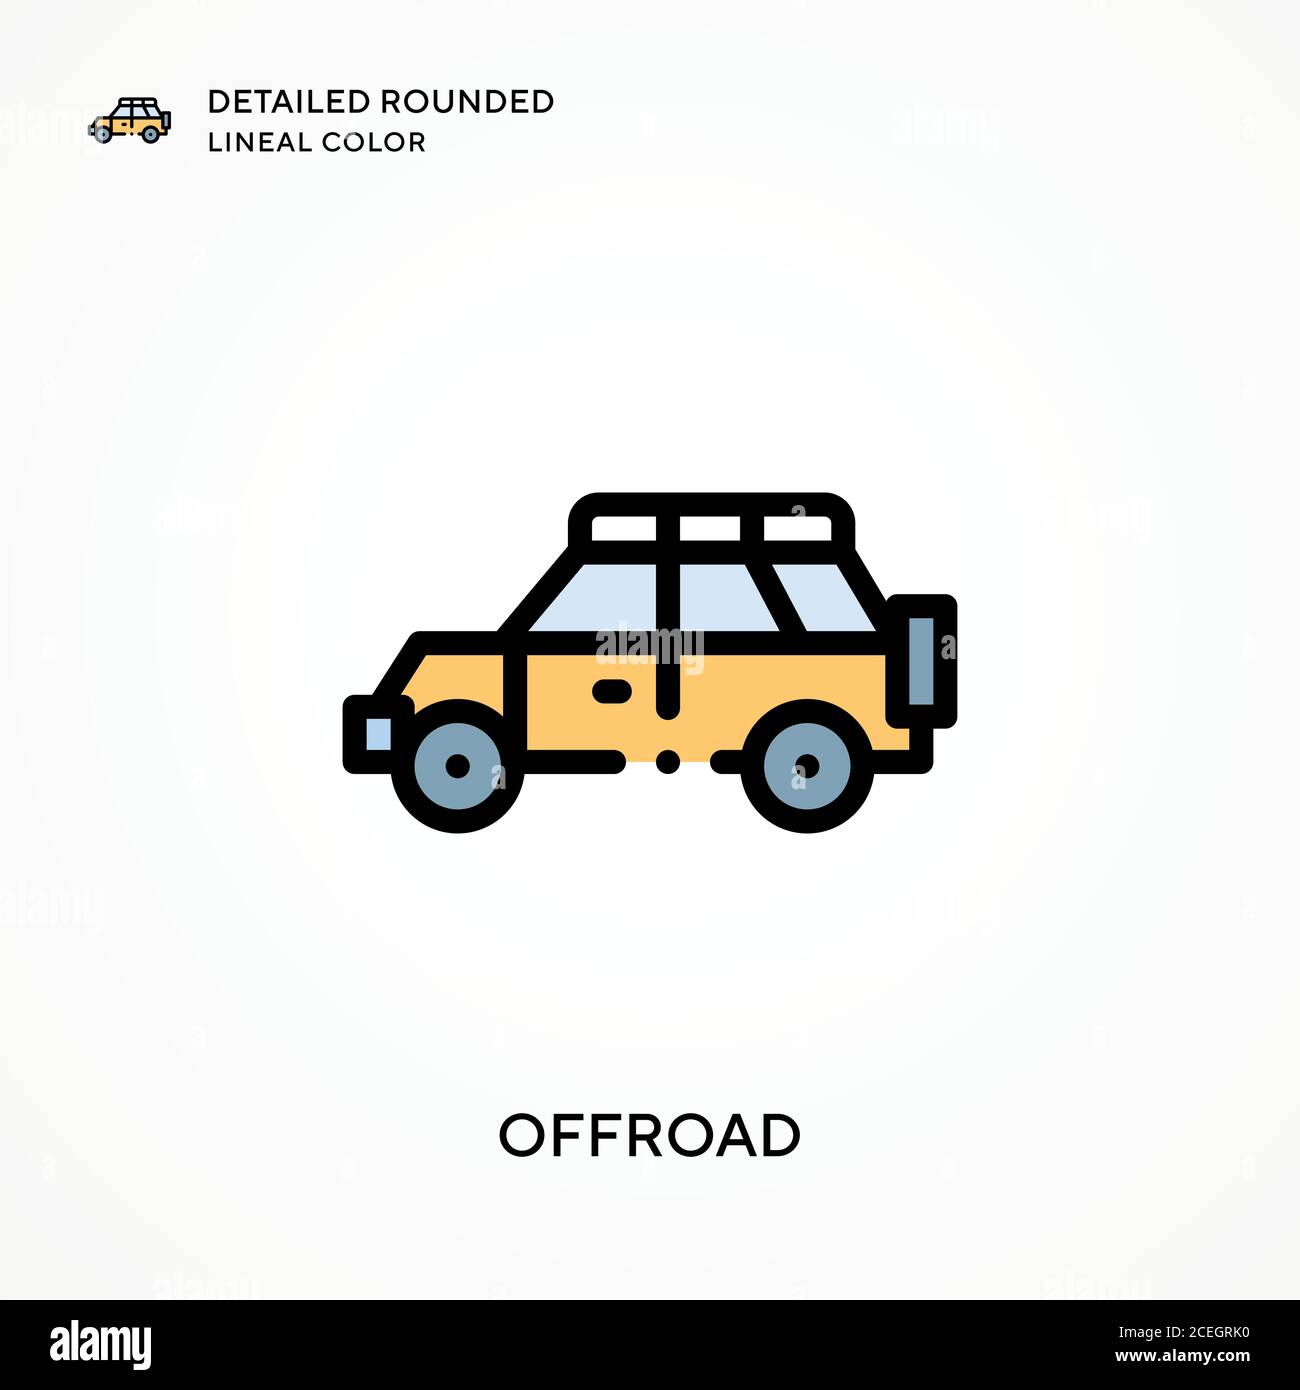 Offroad detailed rounded lineal color. Modern vector illustration concepts. Easy to edit and customize. Stock Vector